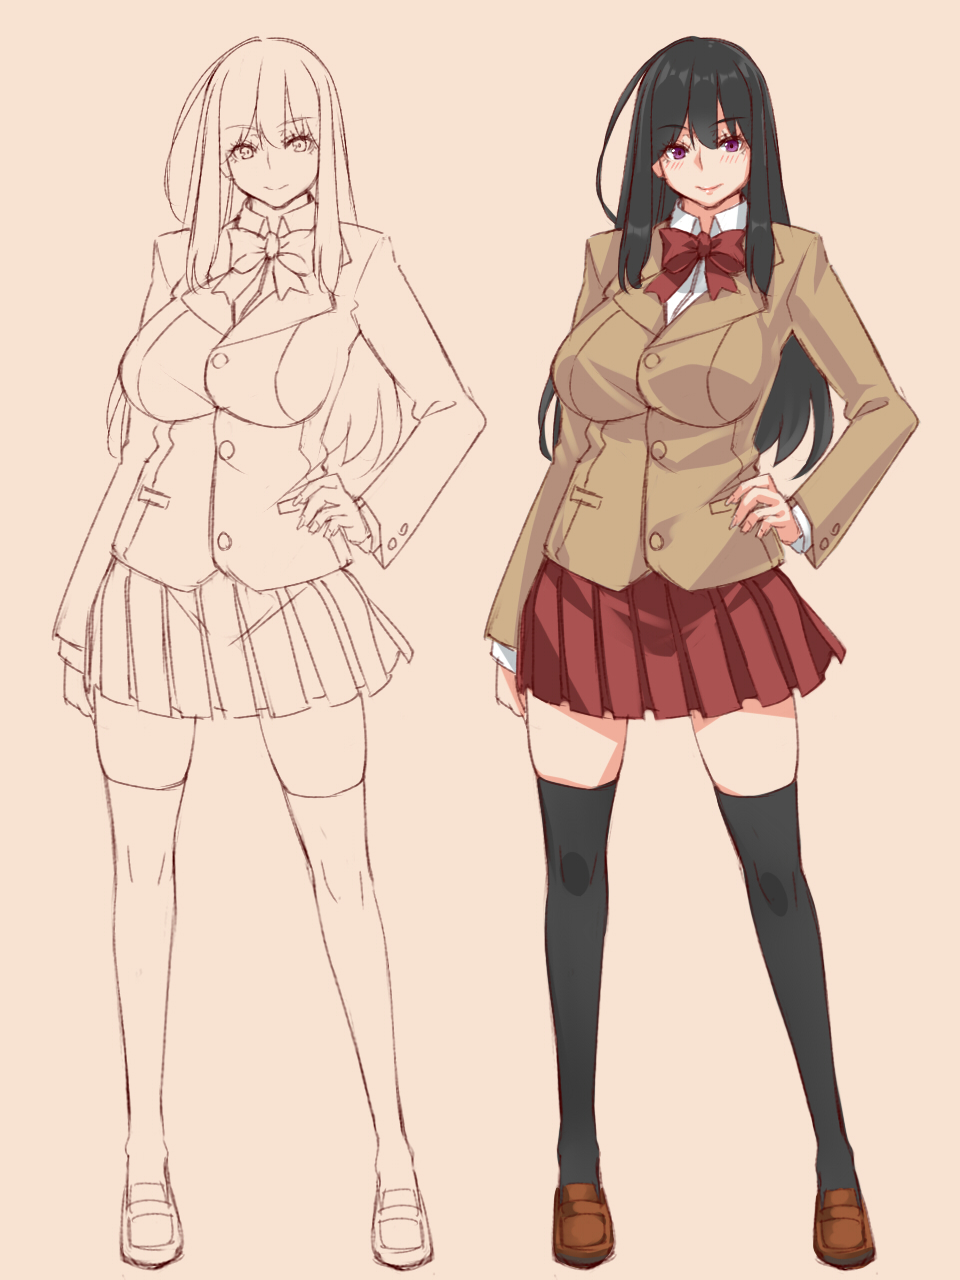 1girl beige_background black_hair black_legwear blush bow brown_footwear character_sheet closed_mouth eyebrows_visible_through_hair fingernails hand_on_hip hayama_kazusa highres long_hair original red_bow red_neckwear red_skirt school_uniform simple_background sketch skirt sleeves_past_wrists smile solo standing thigh-highs uniform violet_eyes